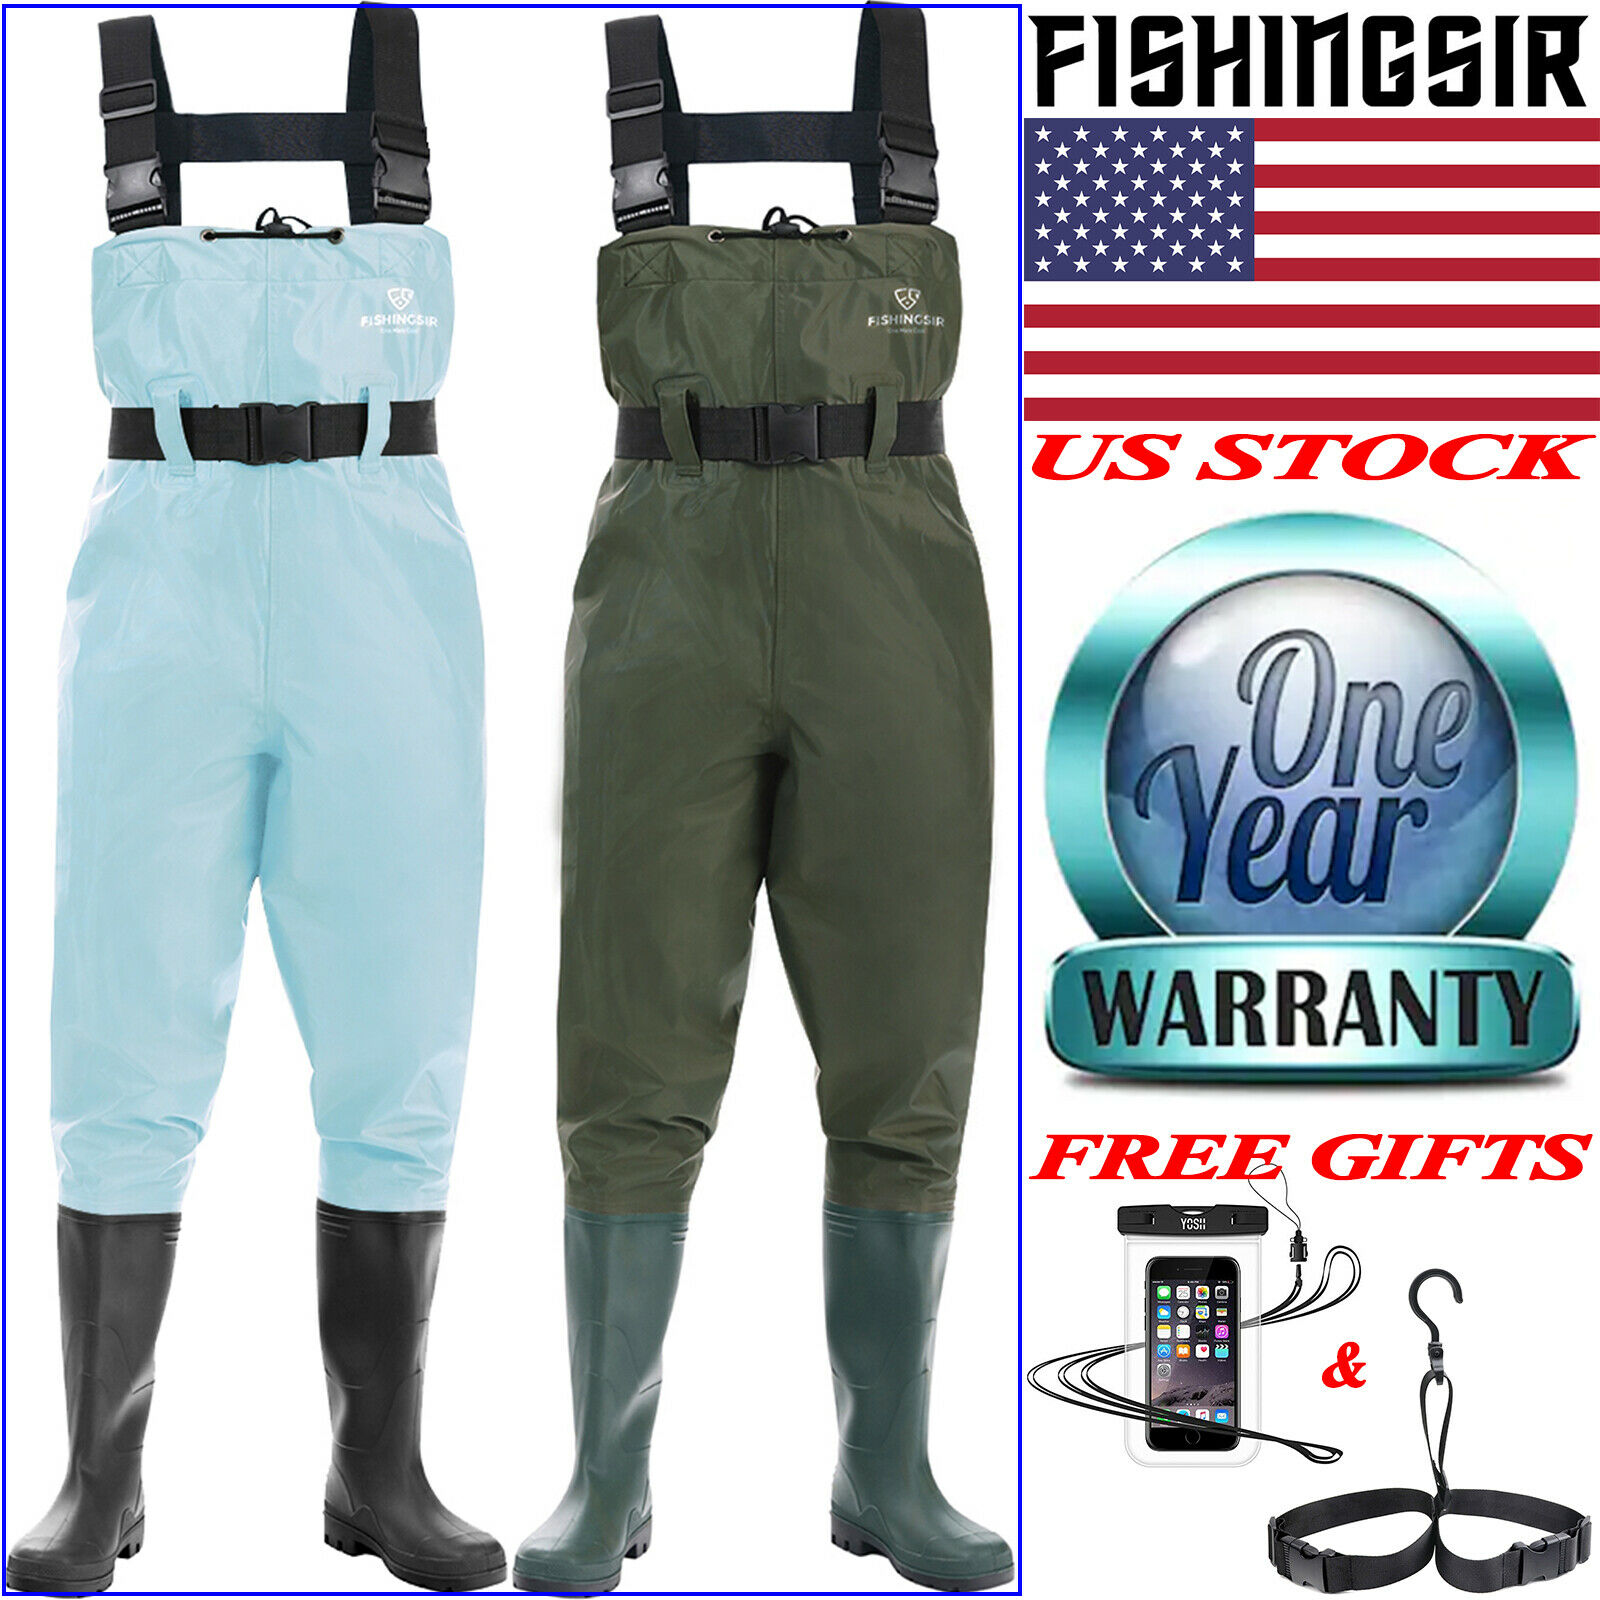 Fishingsir Nylon Pvc 2-ply Chest Waders Cleated Bootfoot Fishing, Hunting Waders